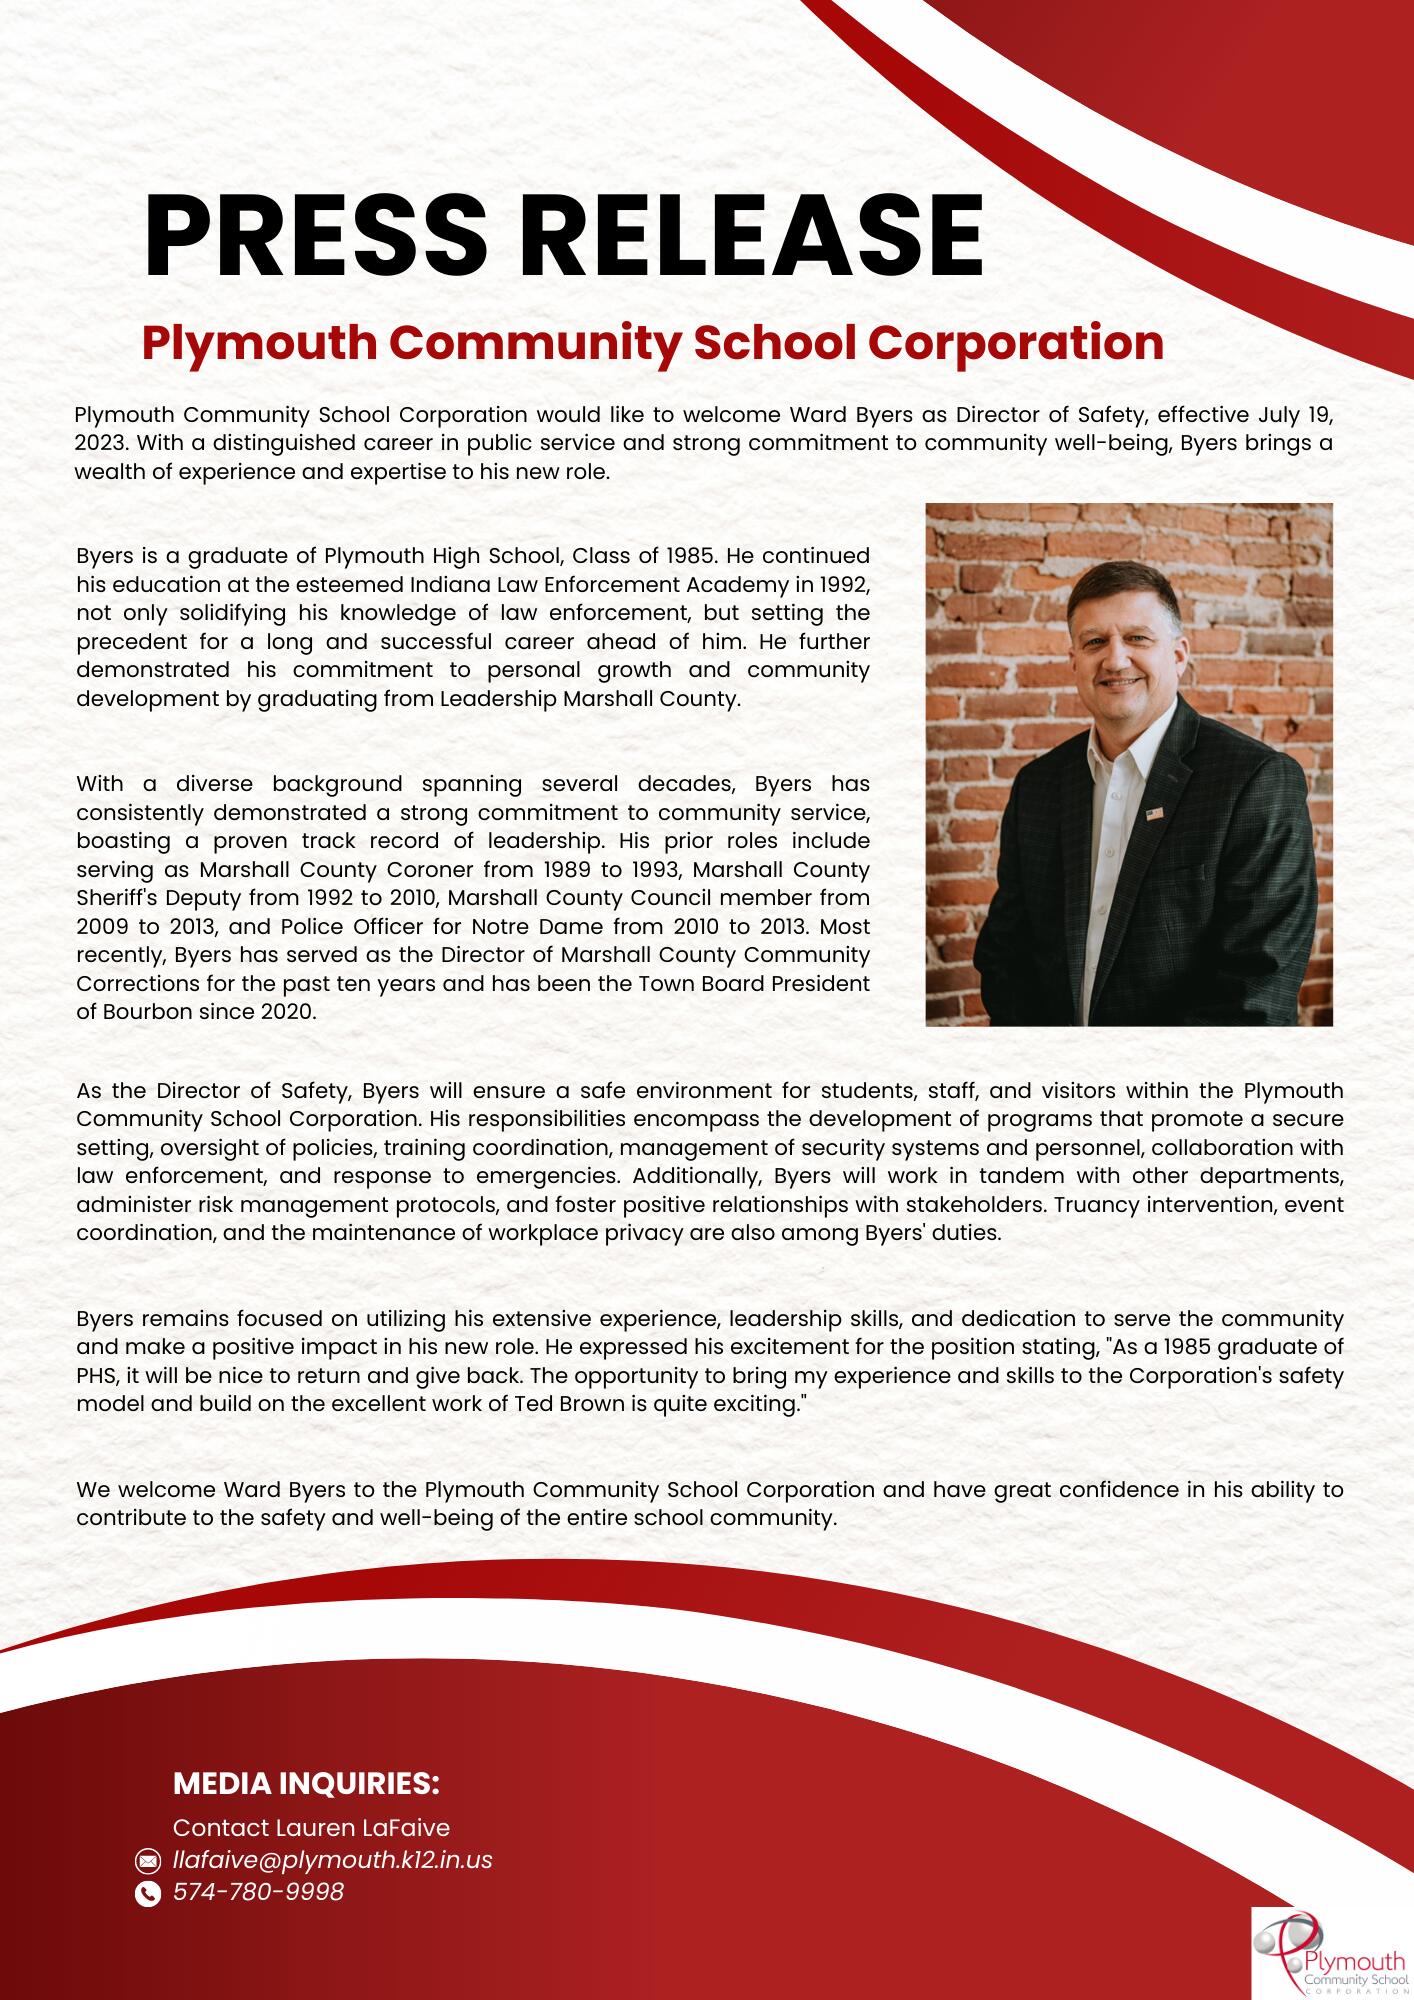 Plymouth Community School Corporation would like to welcome Ward Byers as Director of Safety, effective July 19, 2023. With a distinguished career in public service and strong commitment to community well-being, Byers brings a wealth of experience and expertise to his new role. Byers is a graduate of Plymouth High School, Class of 1985. He continued his education at the esteemed Indiana Law Enforcement Academy in 1992, not only solidifying his knowledge of law enforcement, but setting the precedent for a long and successful career ahead of him. He further demonstrated his commitment to personal growth and community development by graduating from Leadership Marshall County. With a diverse background spanning several decades, Byers has consistently demonstrated a strong commitment to community service, boasting a proven track record of leadership. His prior roles include serving as Marshall County Coroner from 1989 to 1993, Marshall County Sheriff's Deputy from 1992 to 2010, Marshall County Council member from 2009 to 2013, and Police Officer for Notre Dame from 2010 to 2013. Most recently, Byers has served as the Director of Marshall County Community Corrections for the past ten years and has been the Town Board President of Bourbon since 2020. As the Director of Safety, Byers will ensure a safe environment for students, staff, and visitors within the Plymouth Community School Corporation. His responsibilities encompass the development of programs that promote a secure setting, oversight of policies, training coordination, management of security systems and personnel, collaboration with law enforcement, and response to emergencies. Additionally, Byers will work in tandem with other departments, administer risk management protocols, and foster positive relationships with stakeholders. Truancy intervention, event coordination, and the maintenance of workplace privacy are also among Byers' duties. Byers remains focused on utilizing his extensive experience, leadership skills, and dedication to serve the community and make a positive impact in his new role. He expressed his excitement for the position stating, "As a 1985 graduate of PHS, it will be nice to return and give back. The opportunity to bring my experience and skills to the Corporation's safety model and build on the excellent work of Ted Brown is quite exciting." We welcome Ward Byers to the Plymouth Community School Corporation and have great confidence in his ability to contribute to the safety and well-being of the entire school community.